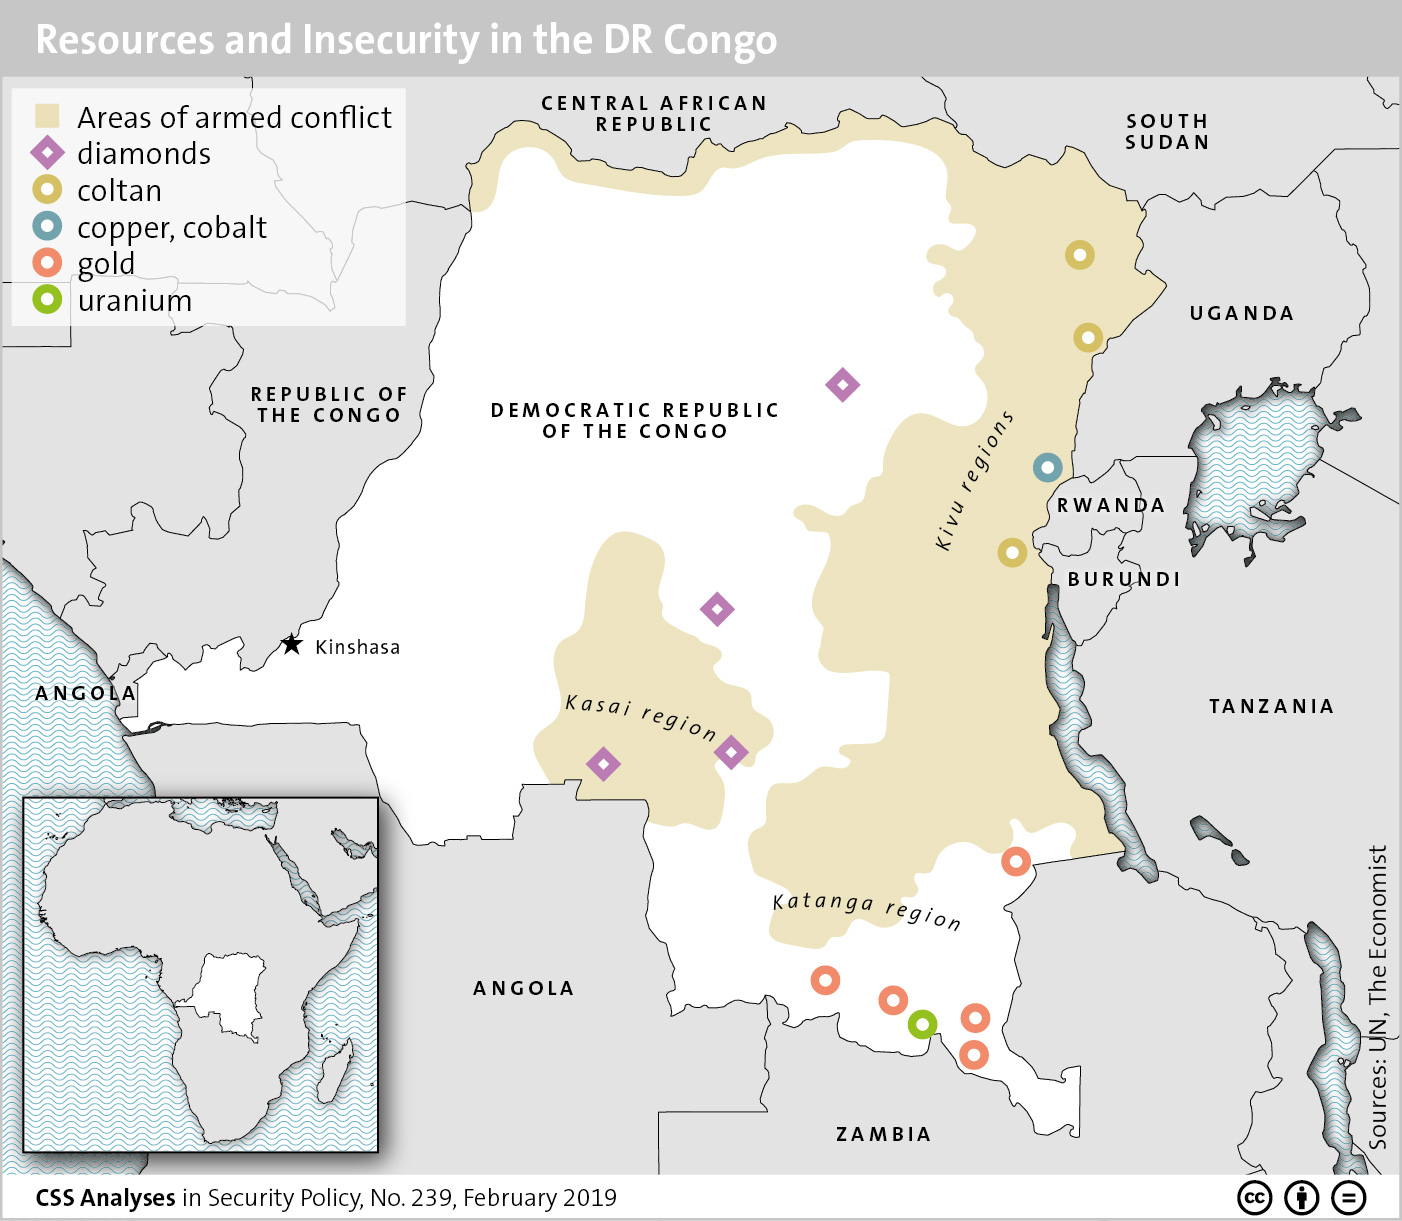 Resources and Insecurity in the DR Congo